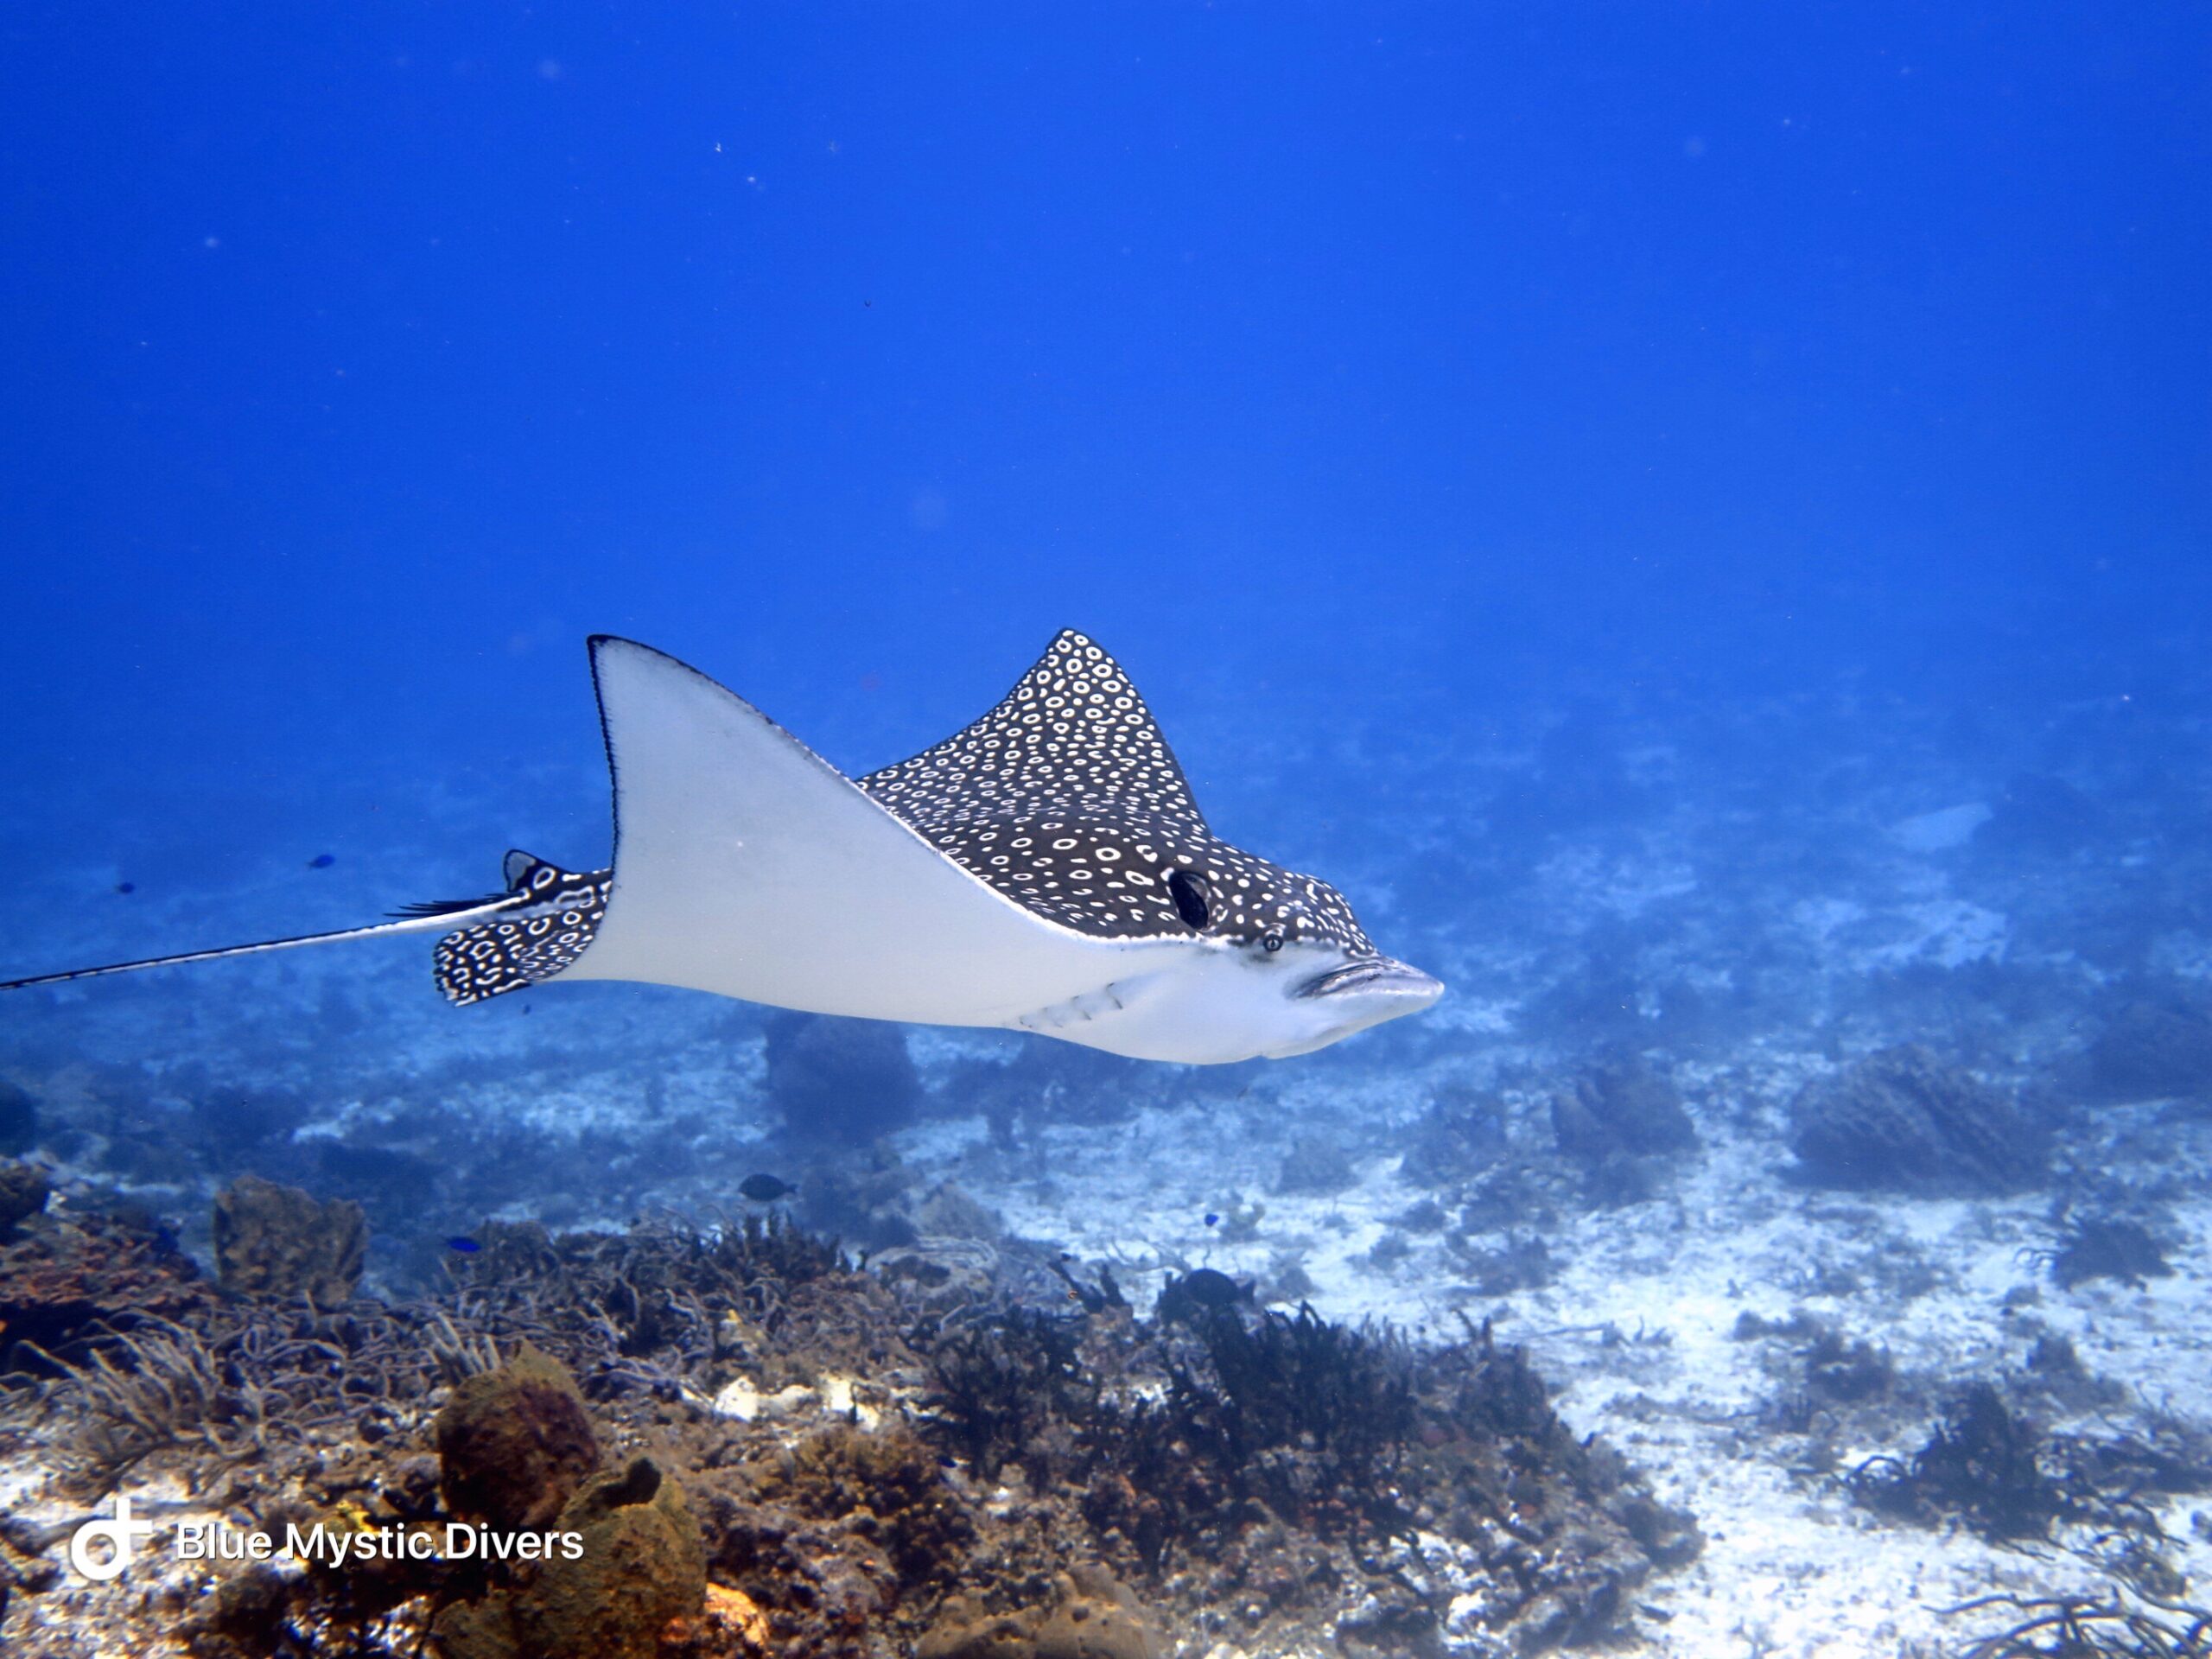 A majestic eagle ray swims from left to right.